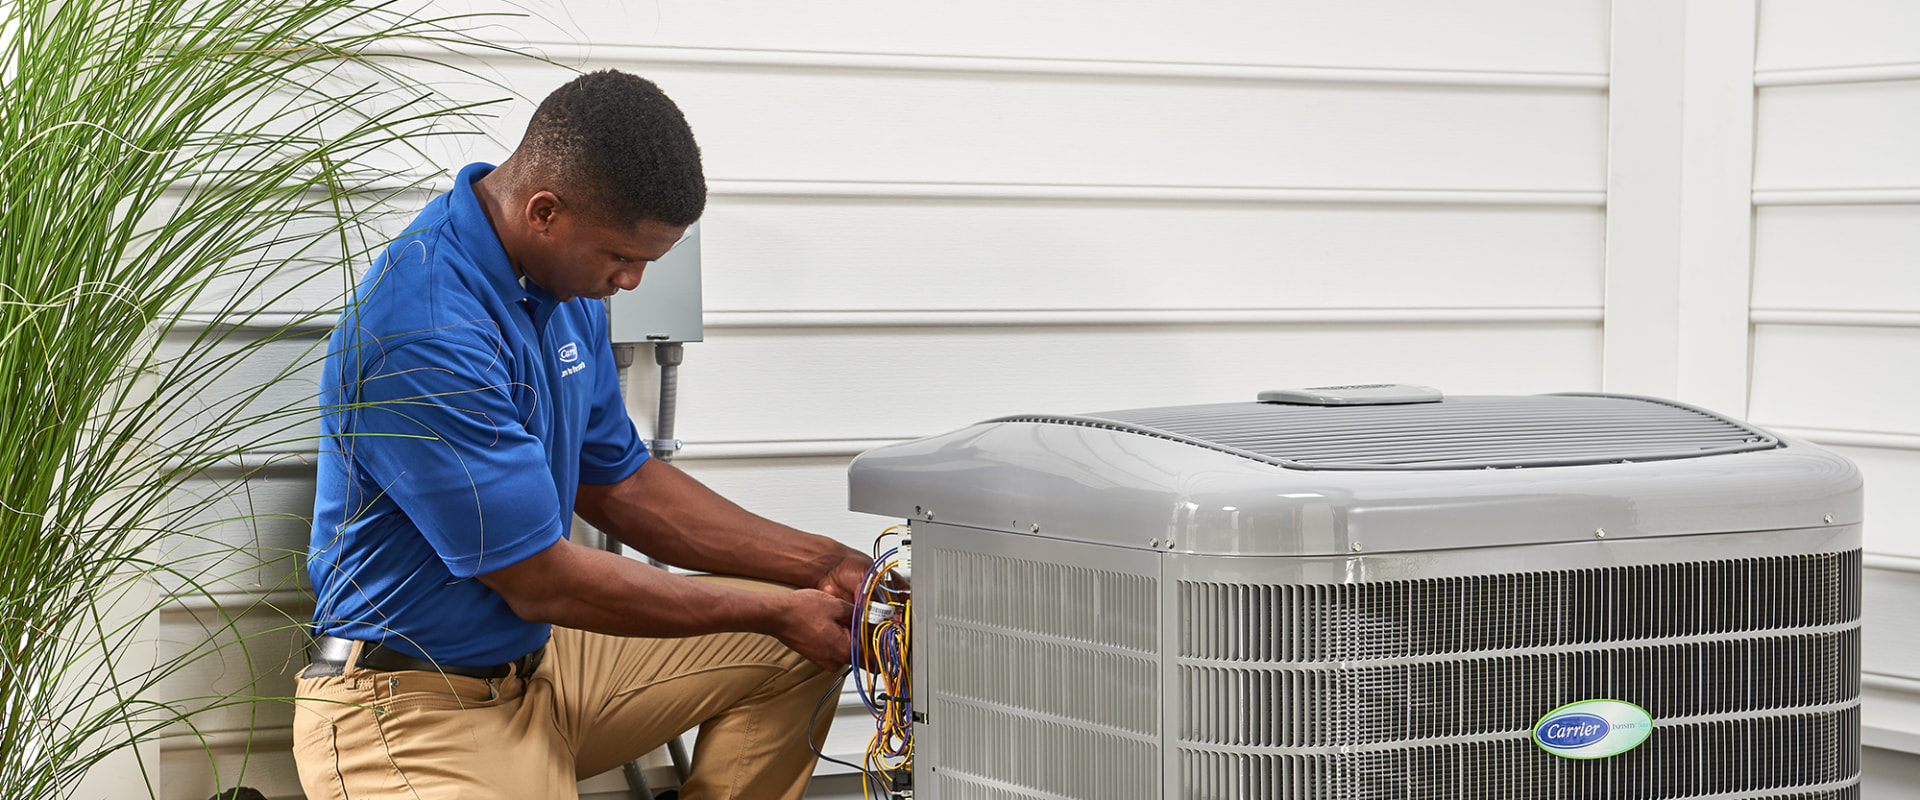 How Long Can Your HVAC System Last?